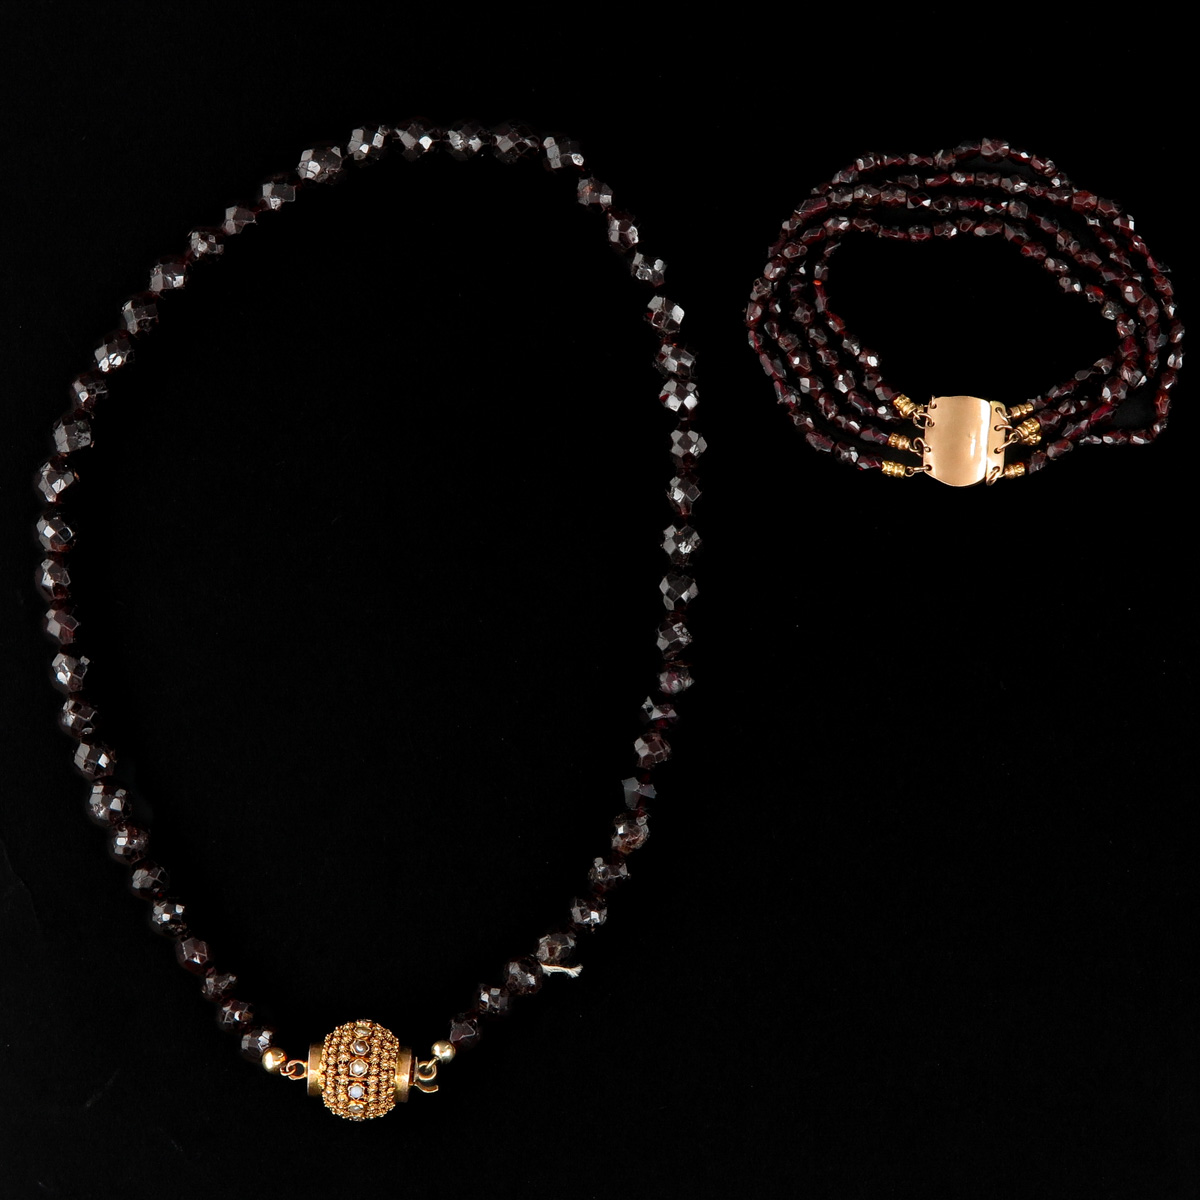 A Collection of Garnet Jewelry - Image 5 of 10